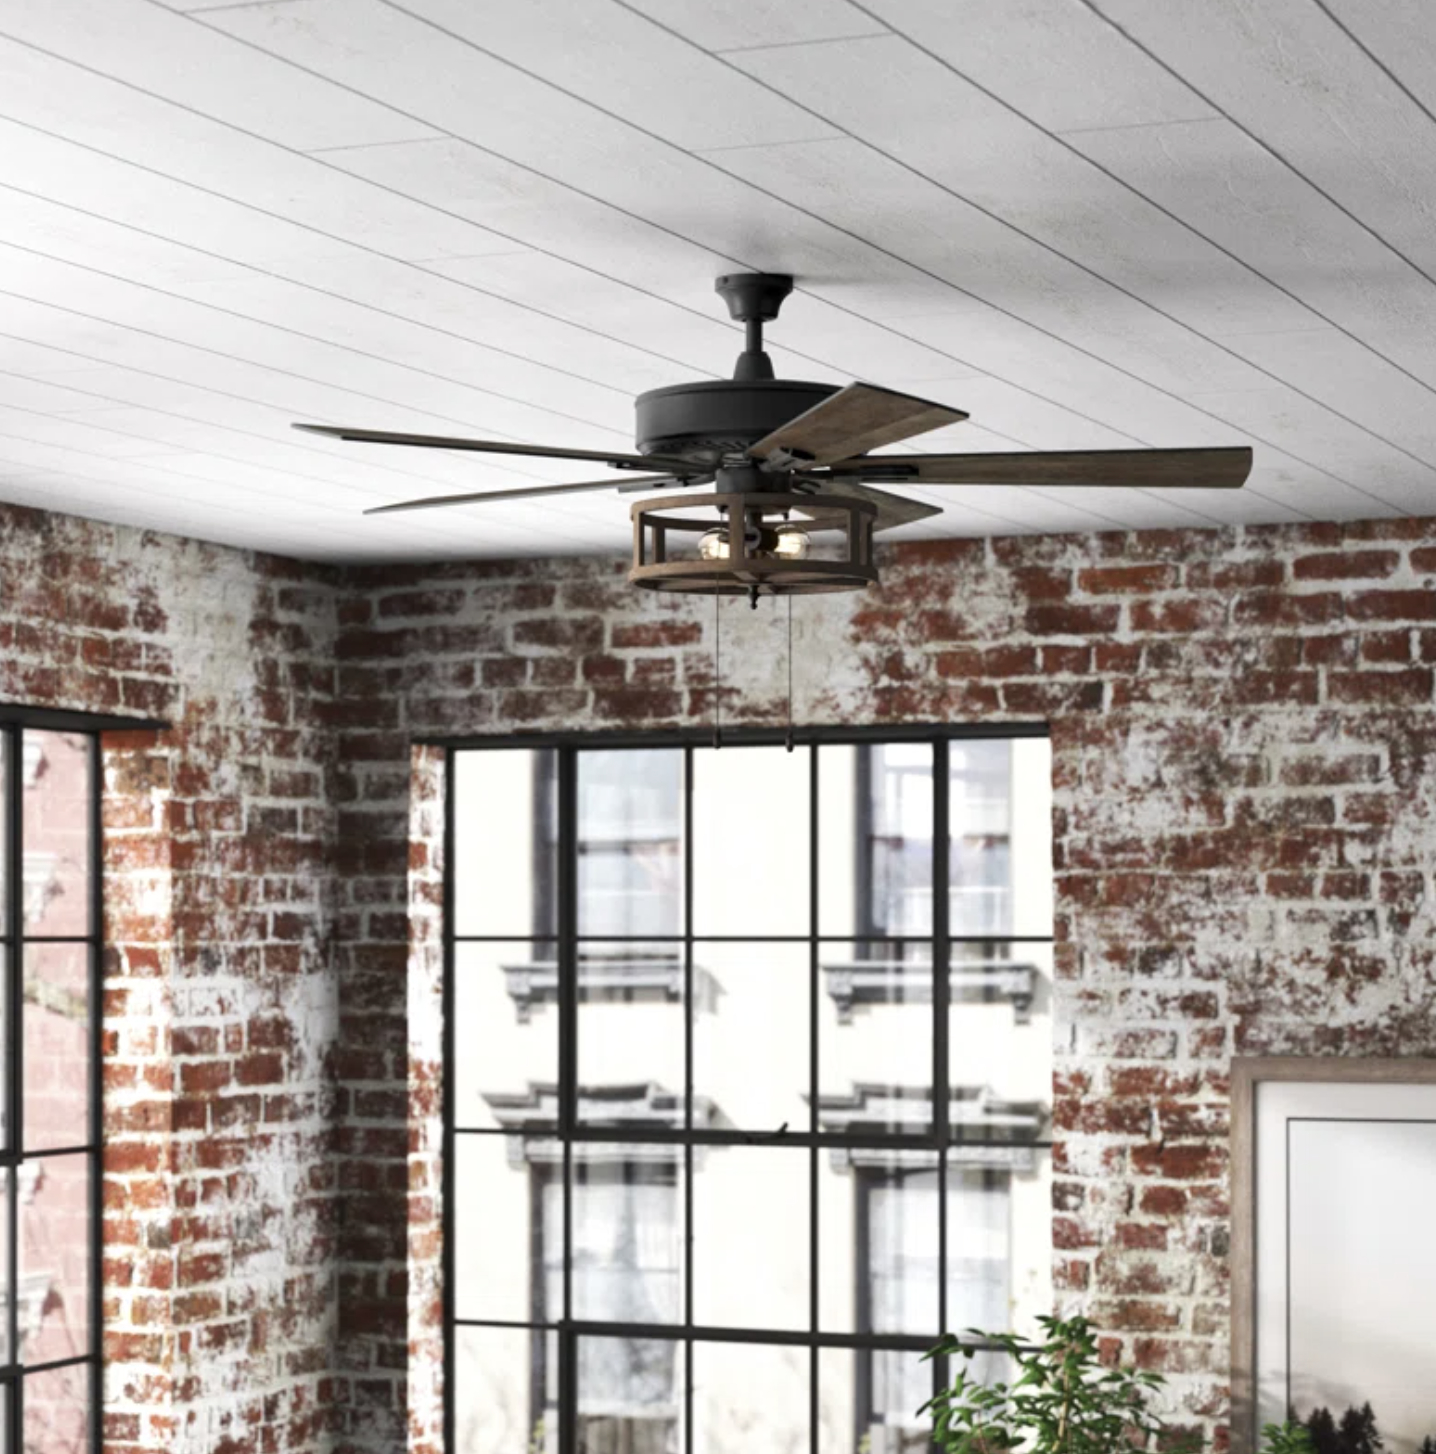 The ceiling fan with lights mounted in a room with a brick wall and large windows